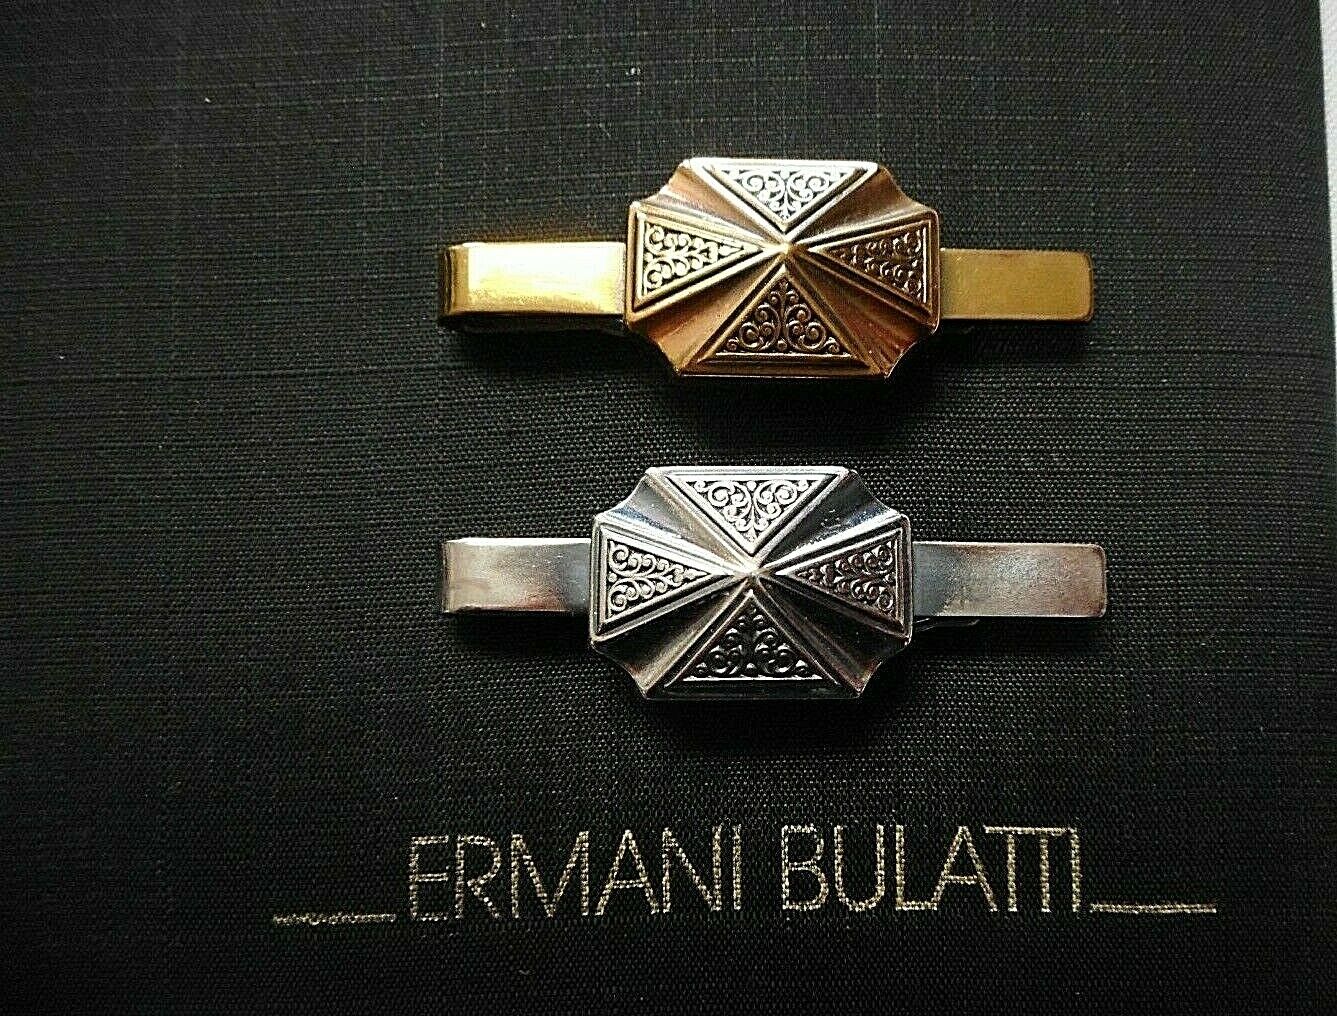 Vintage Men's Tie Clips from the Ermani Bulatti Collection